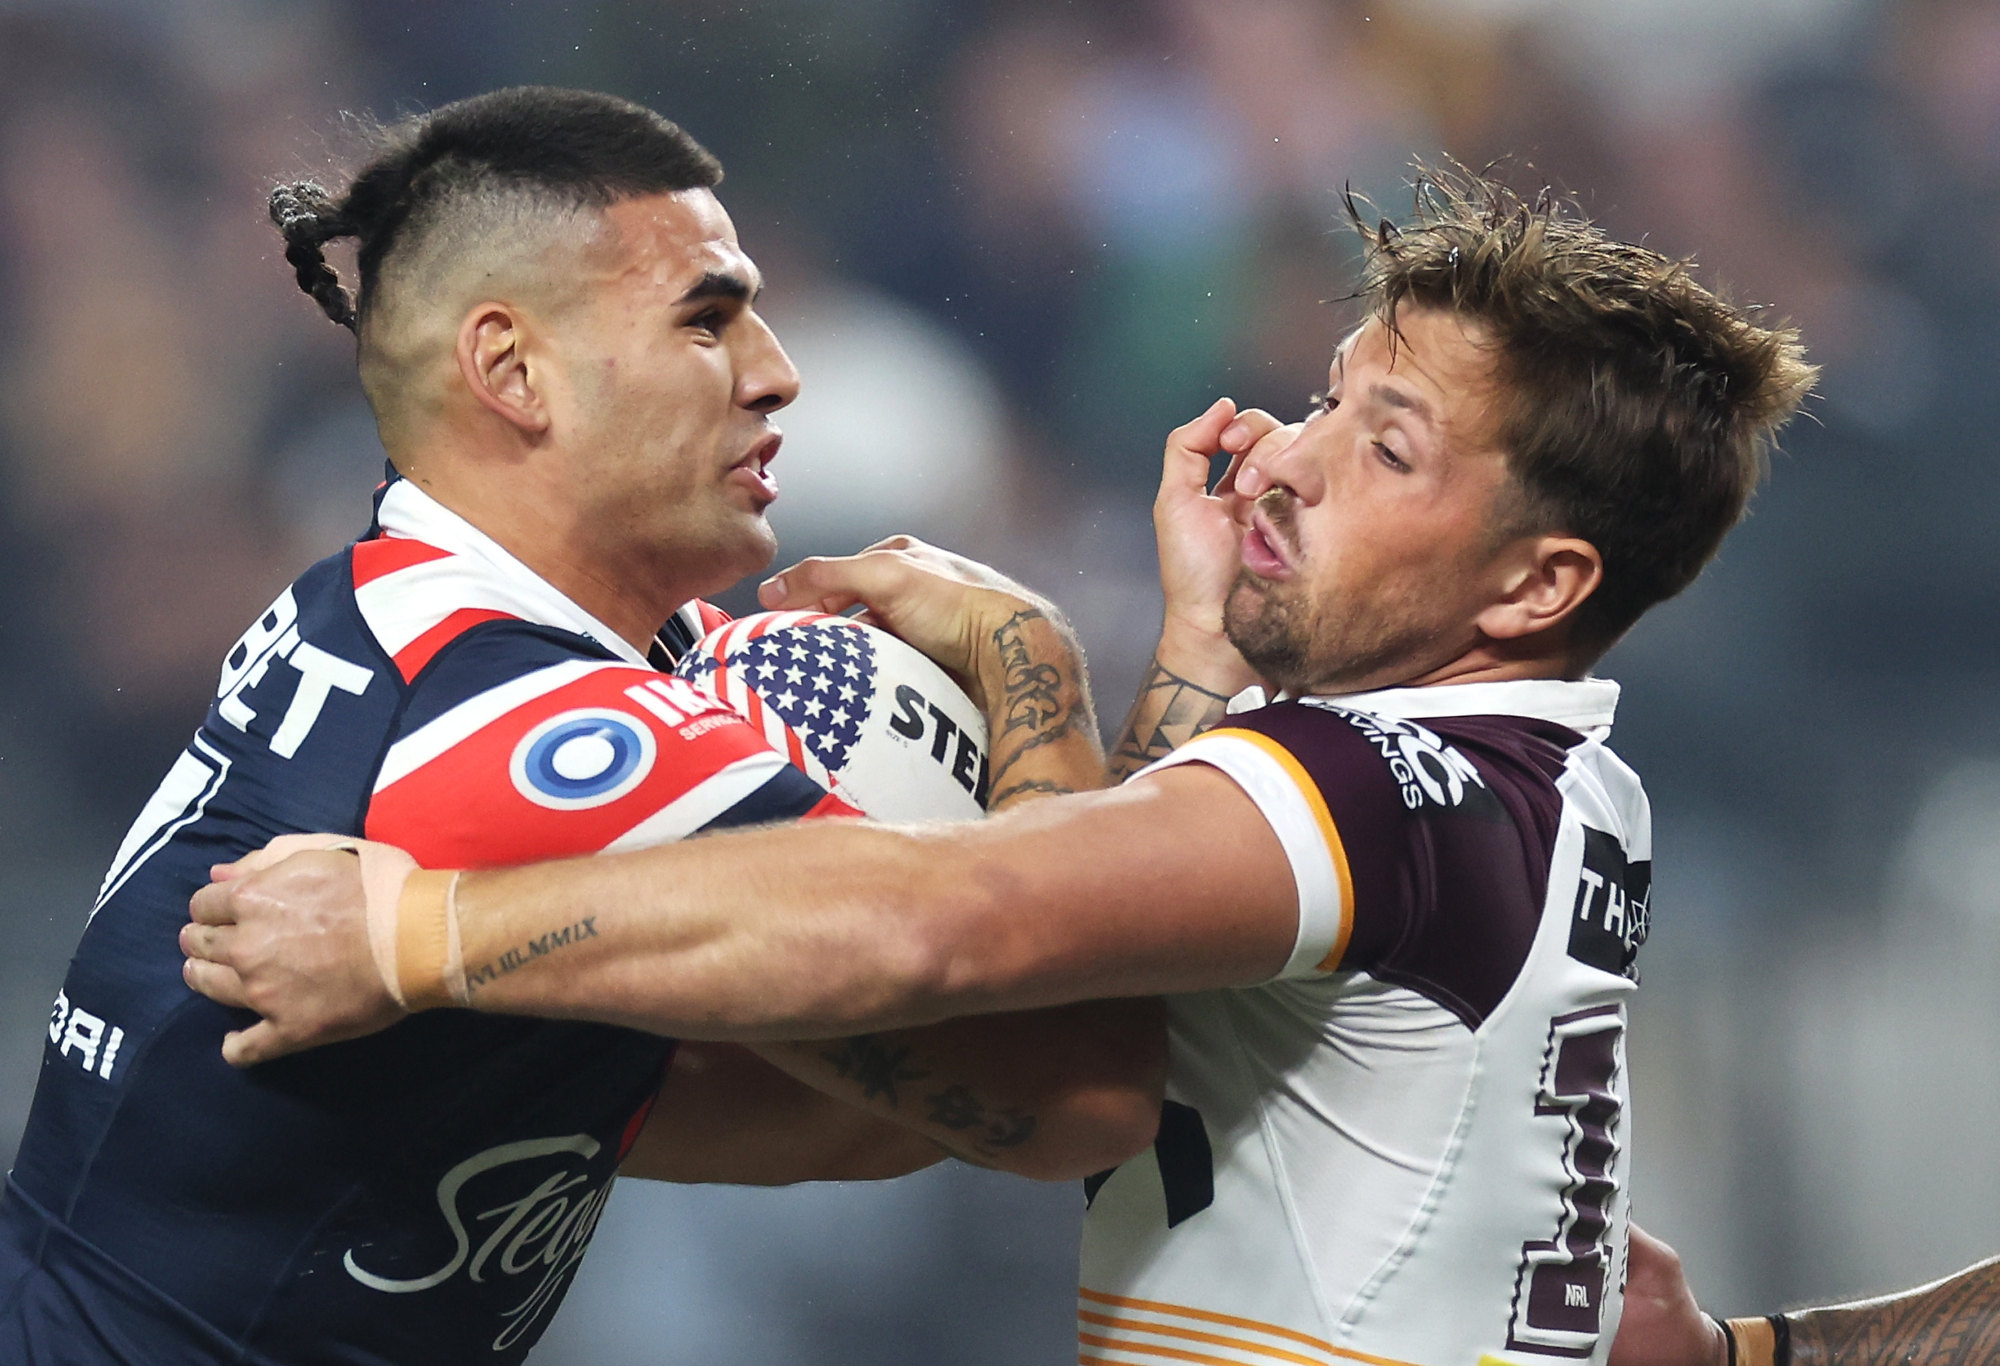 Terrell May of the Roosters is tackled by Tyson Smoothy of the Broncos